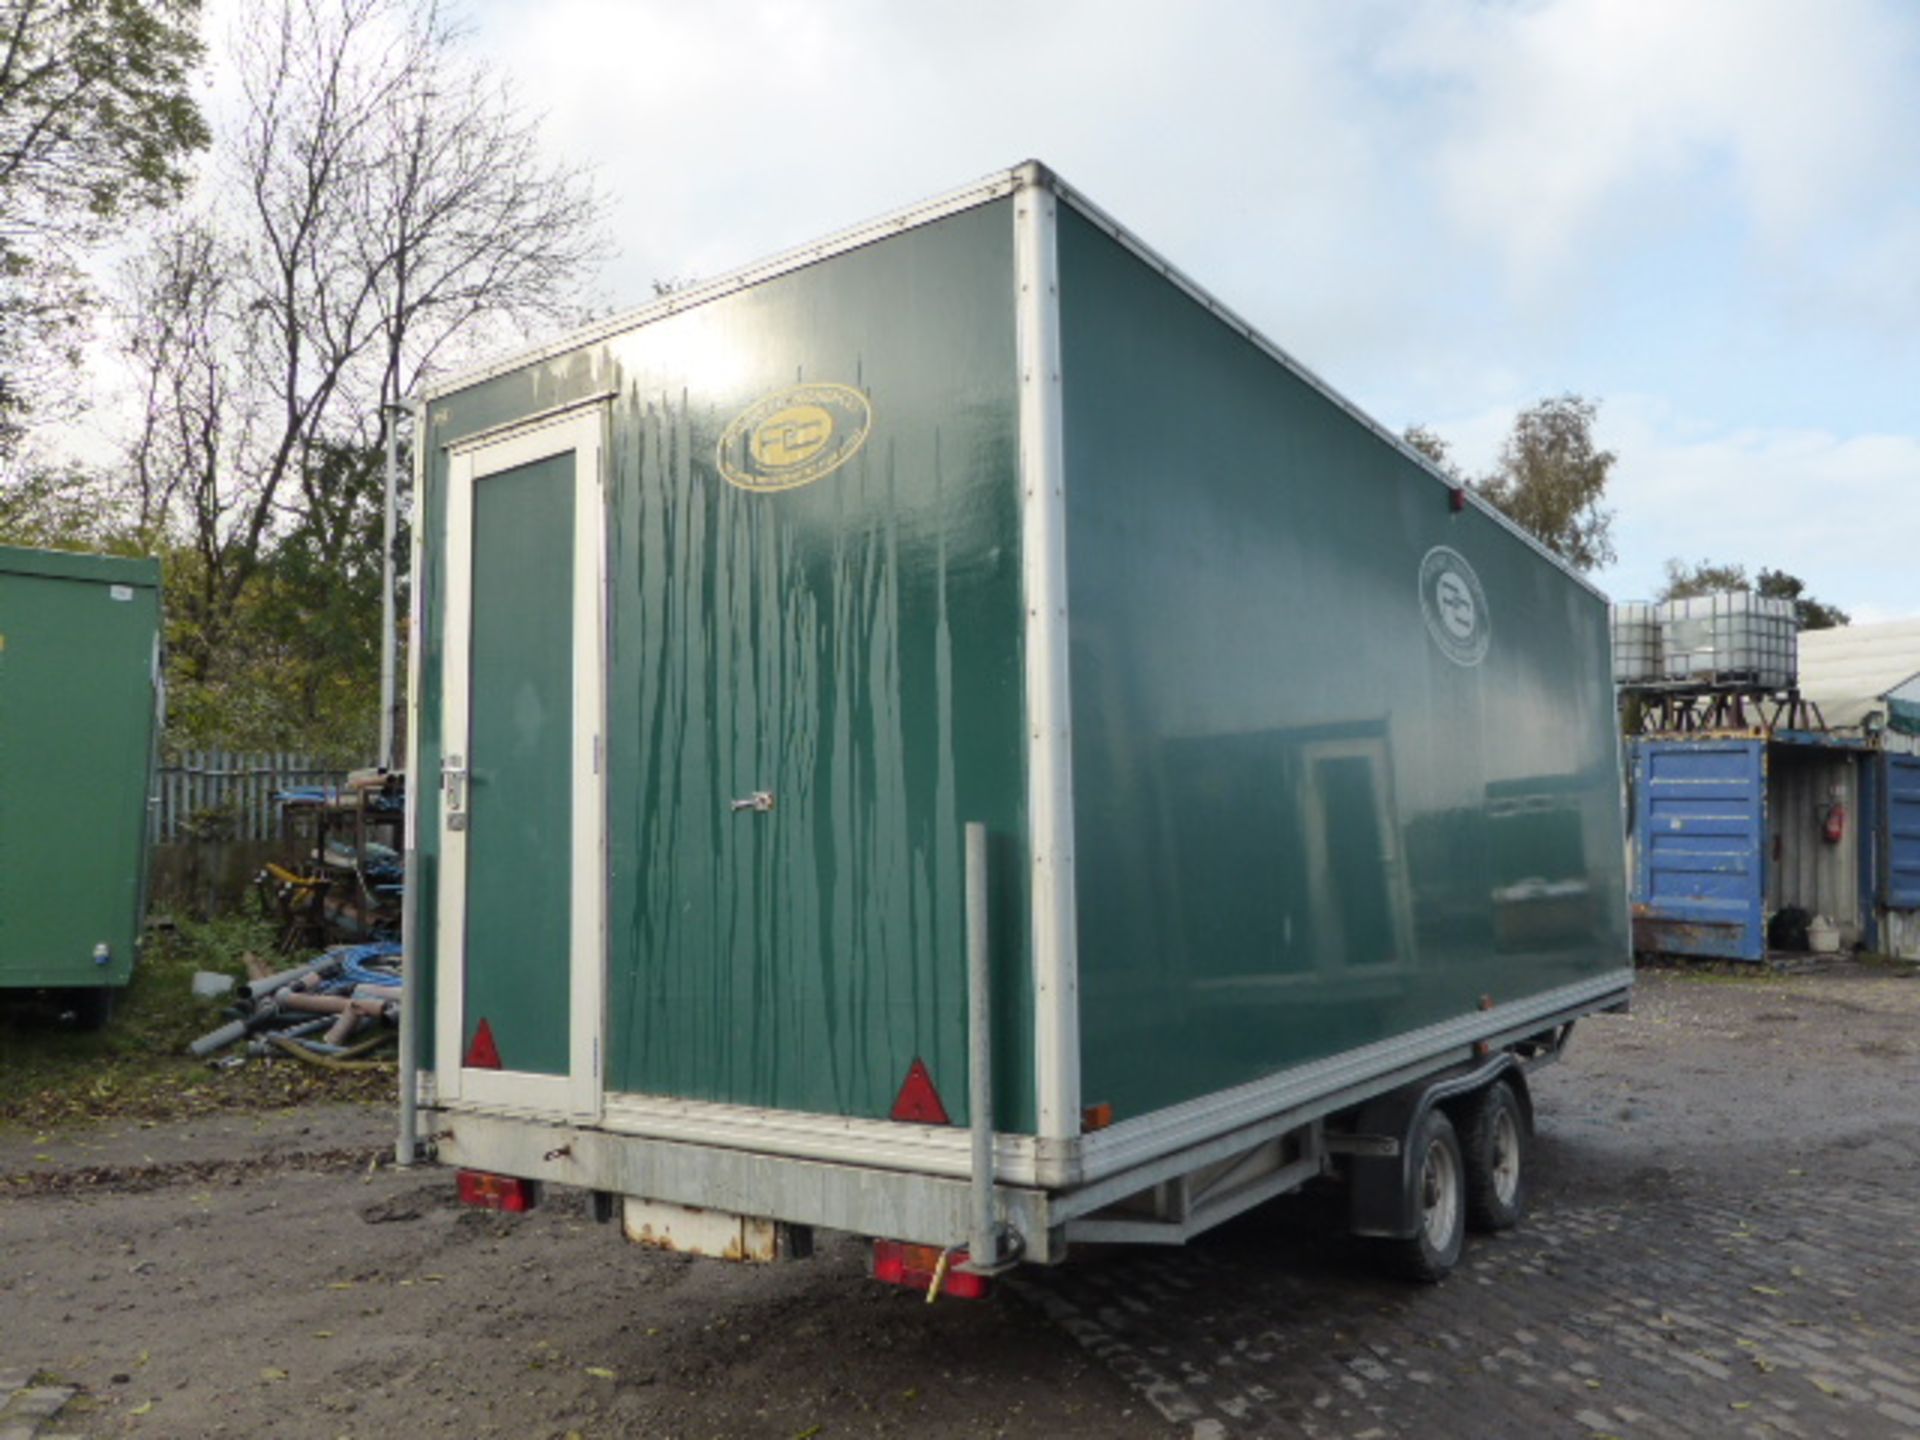 Rivington 4 +2 + urinal luxury toilet trailer with recirculation by Premier Mobile (code RV4) With - Image 6 of 16